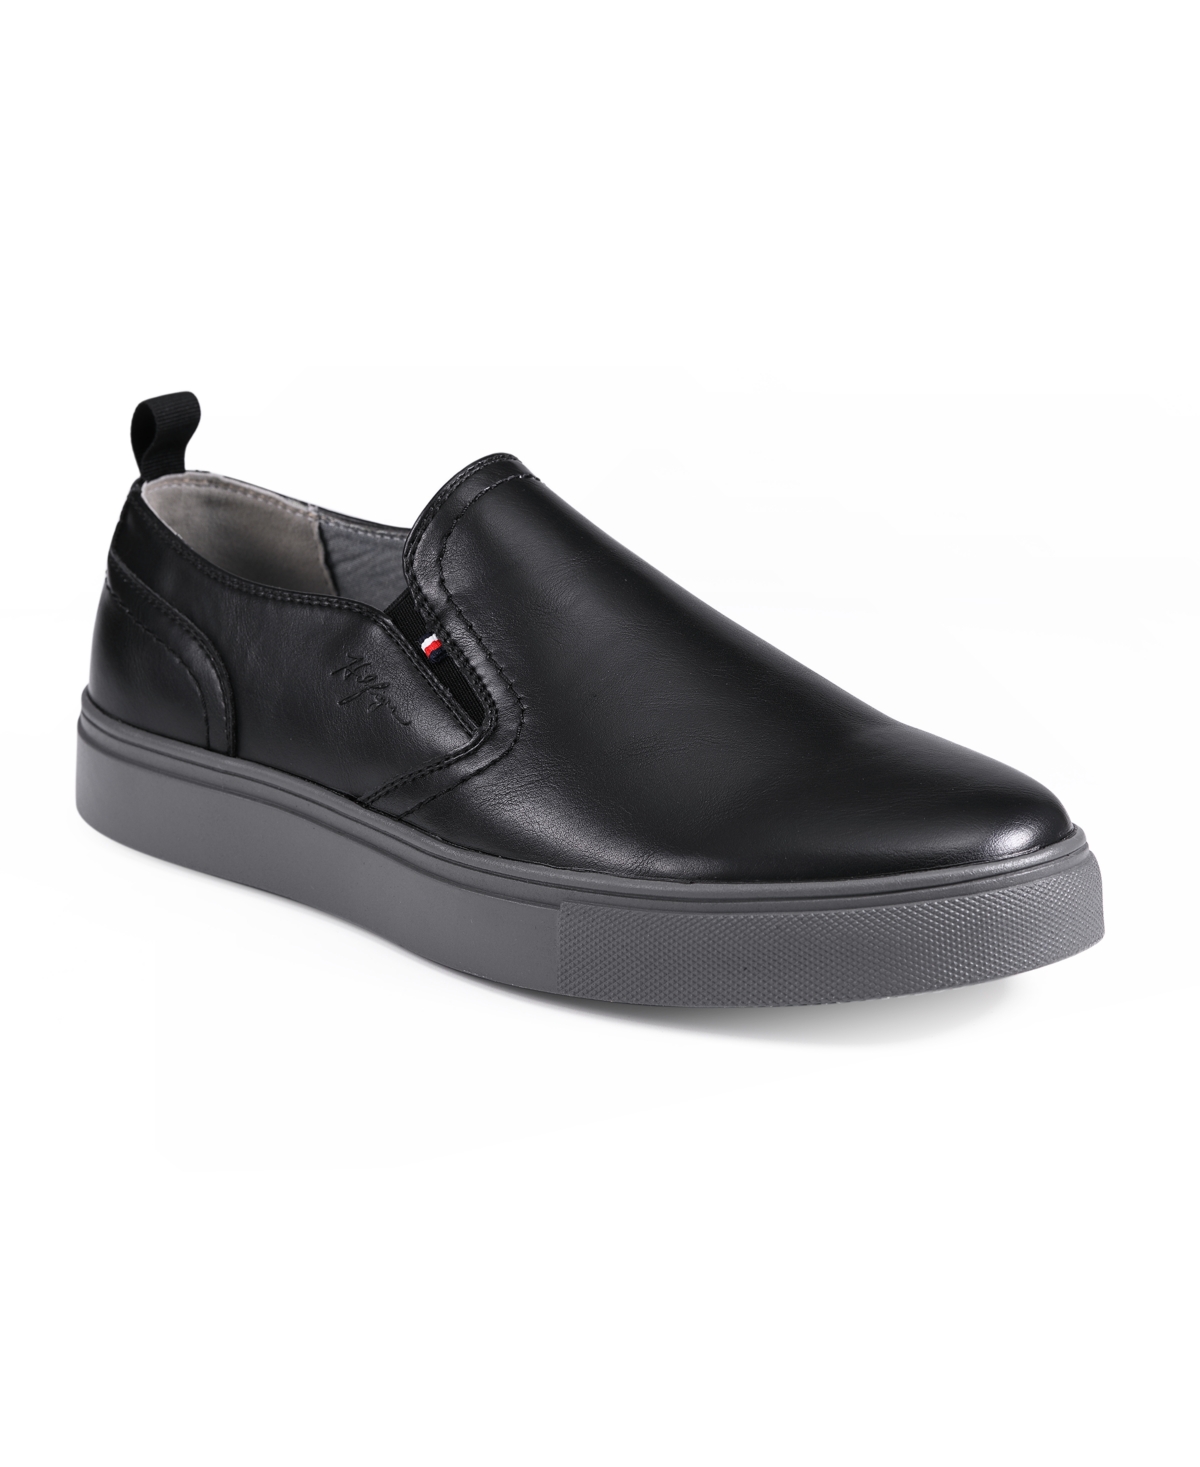 Tommy Hilfiger Men's Kozal Casual Slip On Loafers Men's Shoes In Black Smooth - Faux Leather